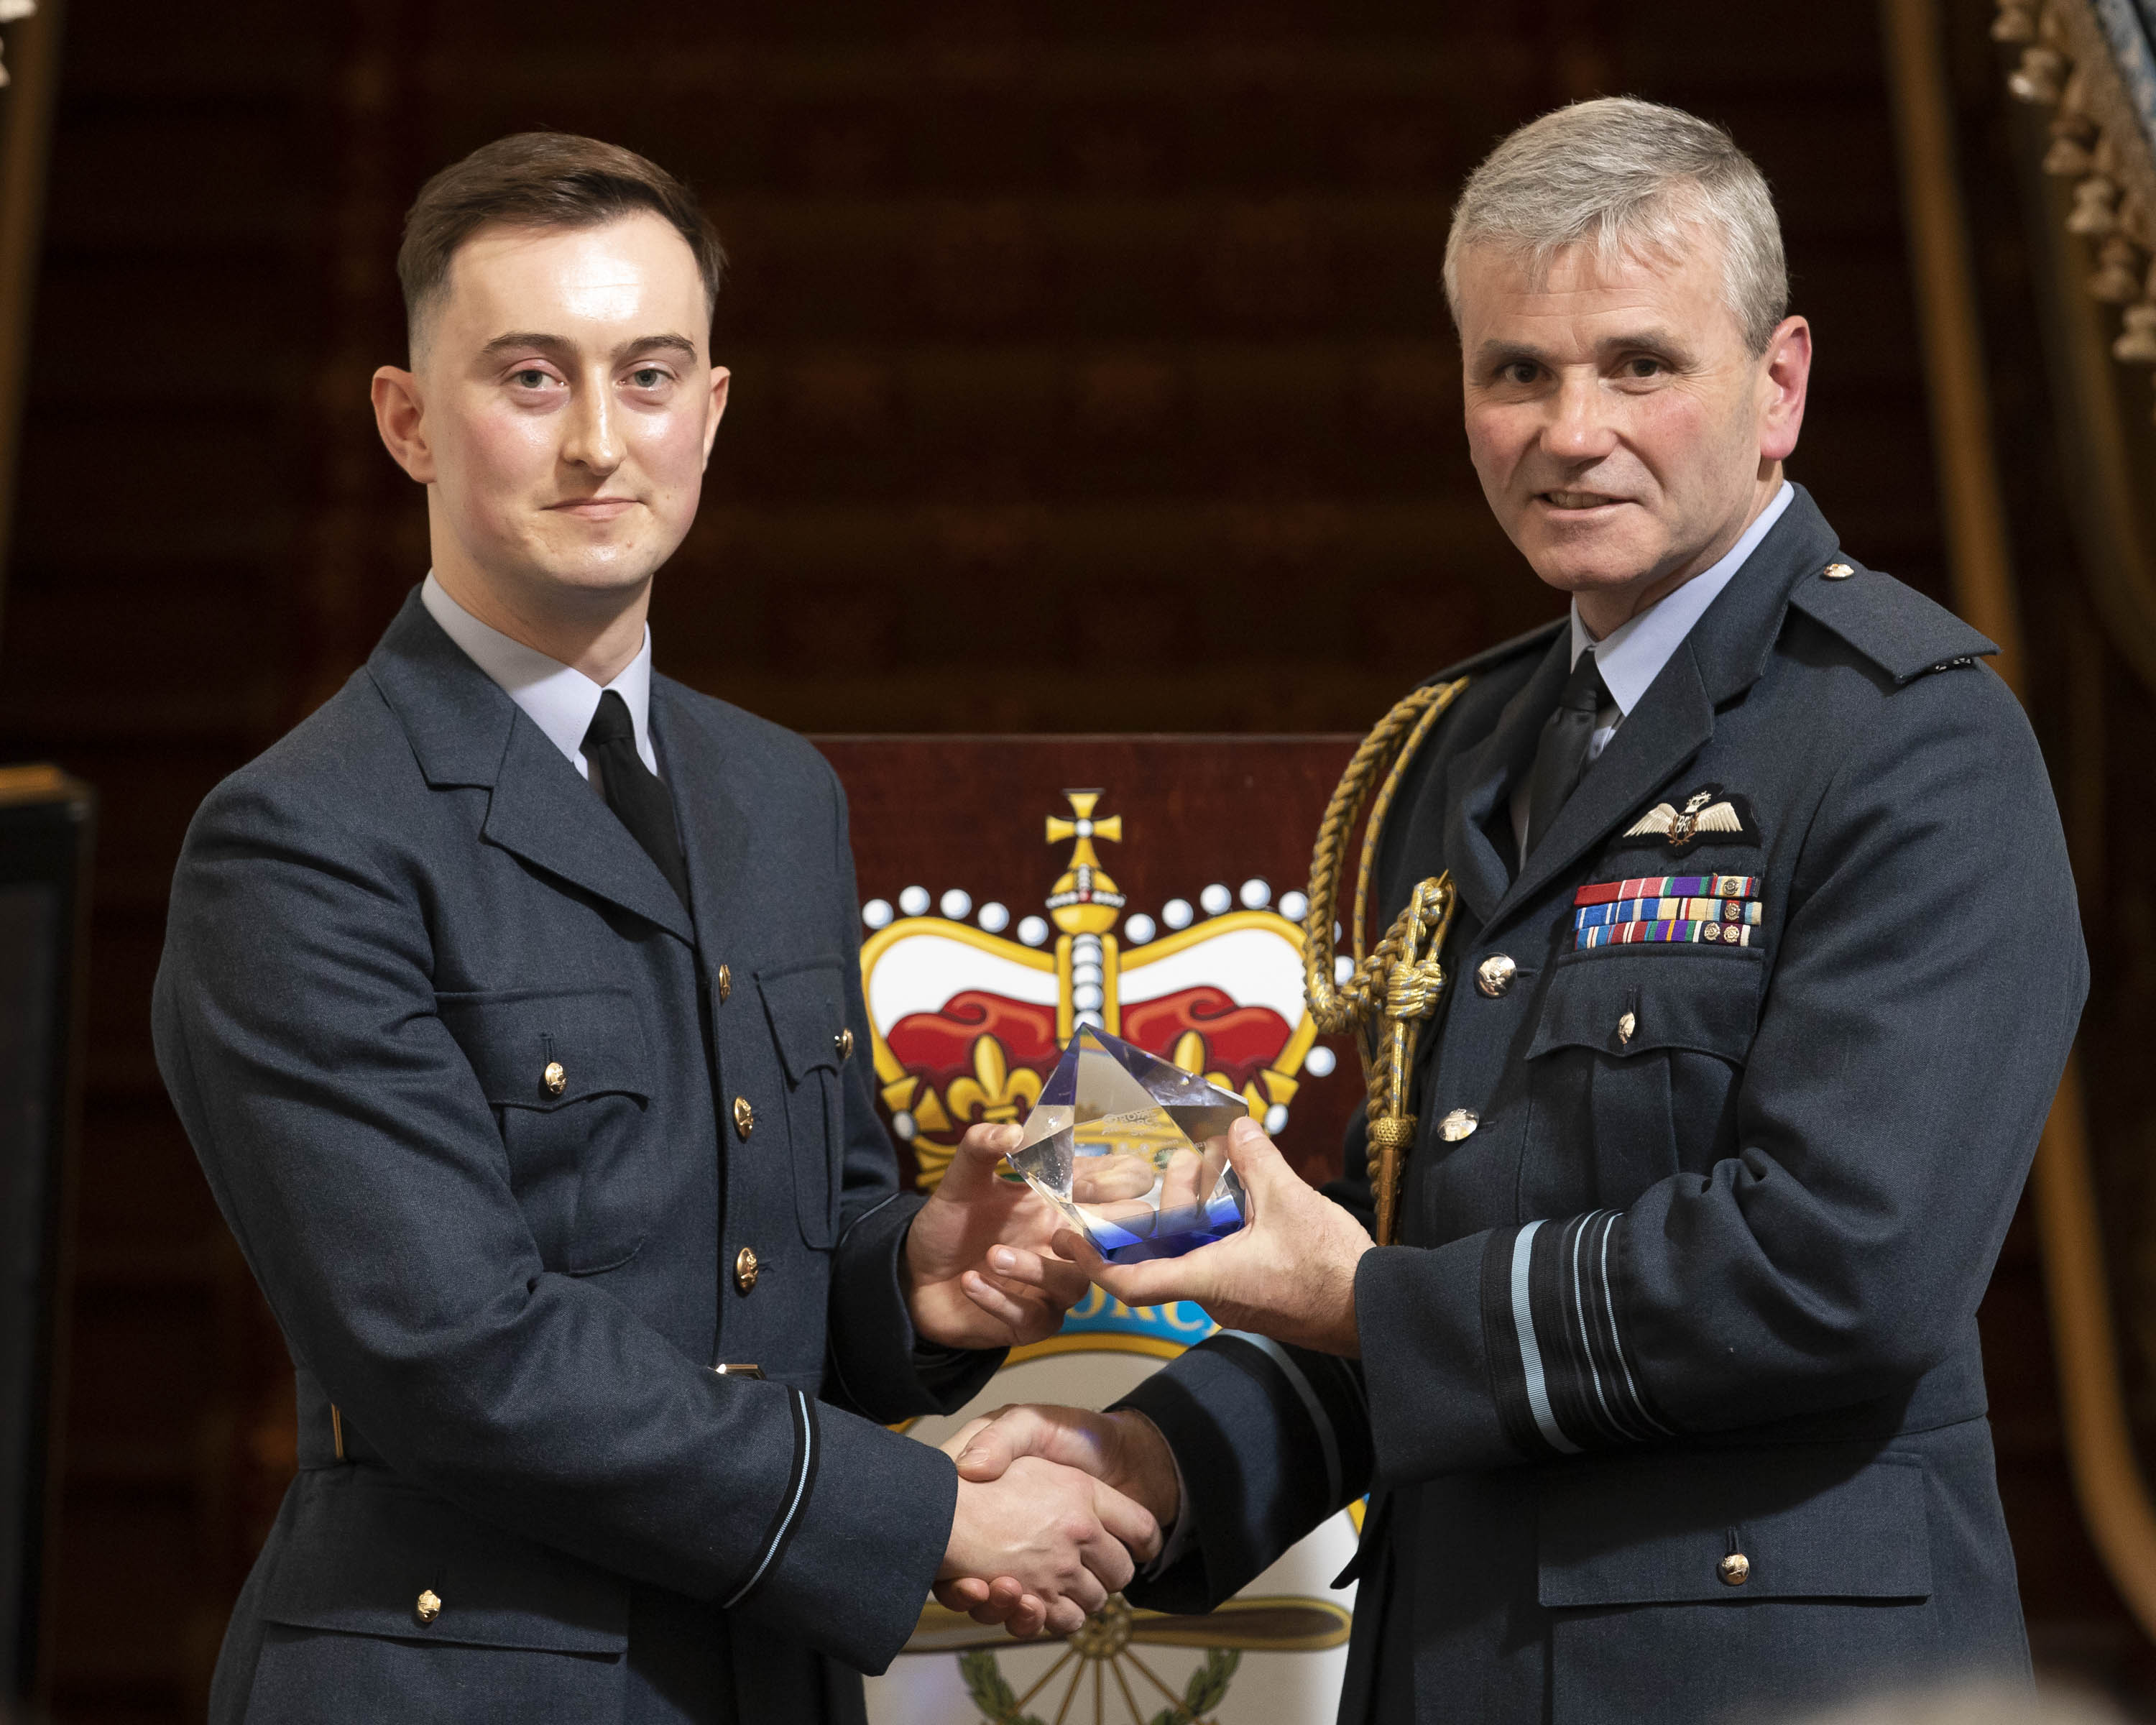 Flying Officer Hilton shakes hands with Air Marshall Andrew Turner while accepting his award.